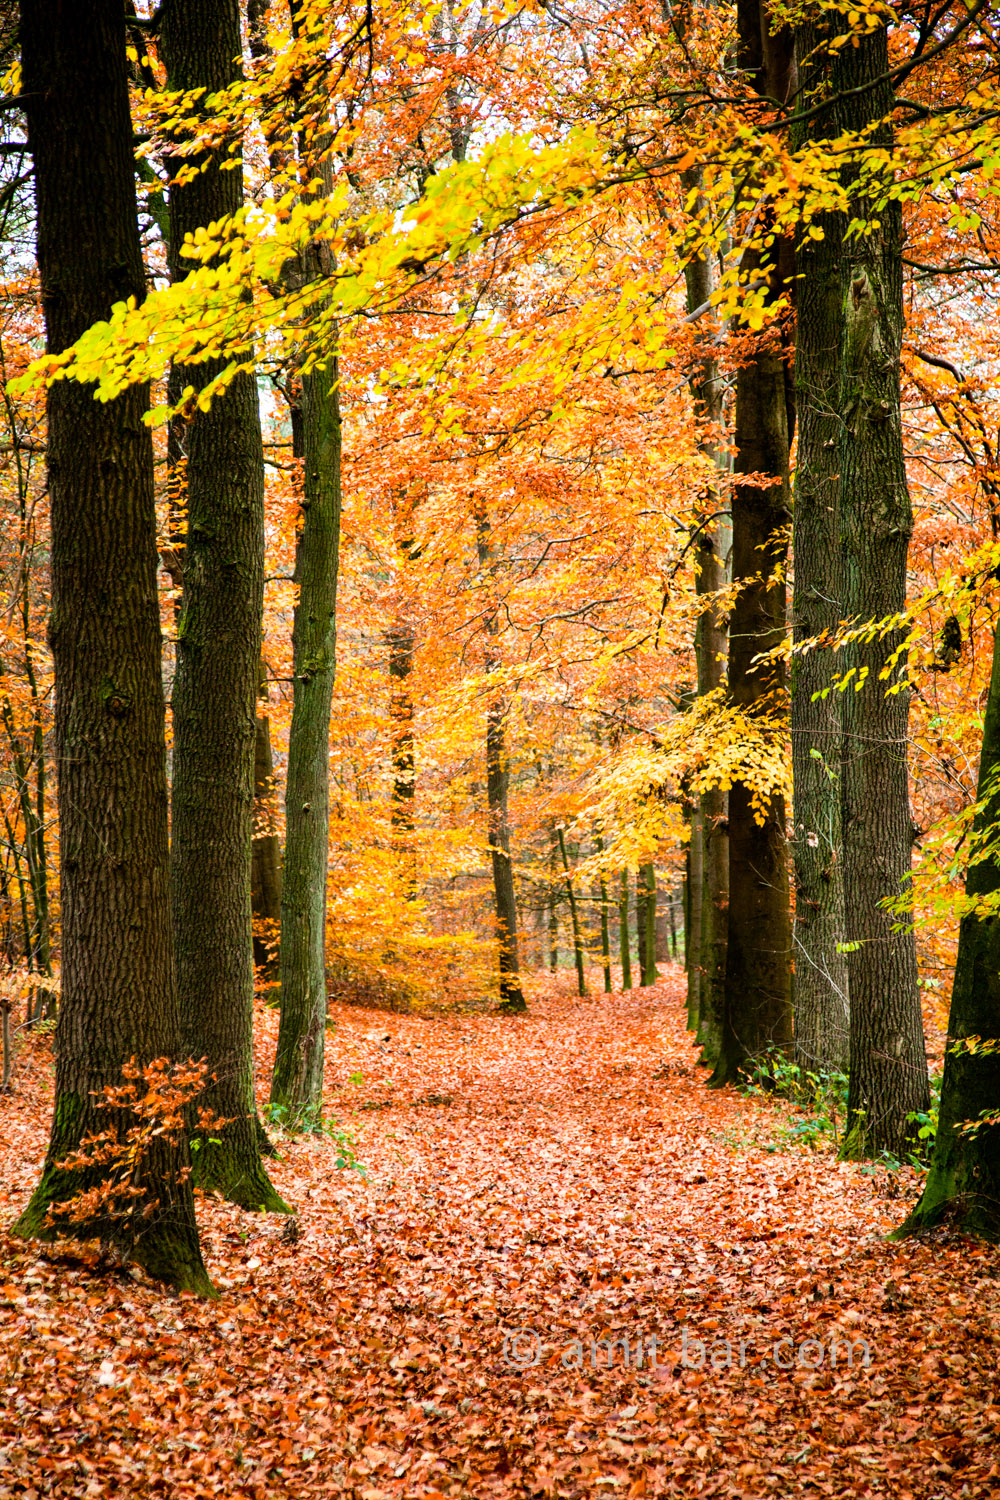 Beech trees in the autumn. Doetinchem, The Netherlands